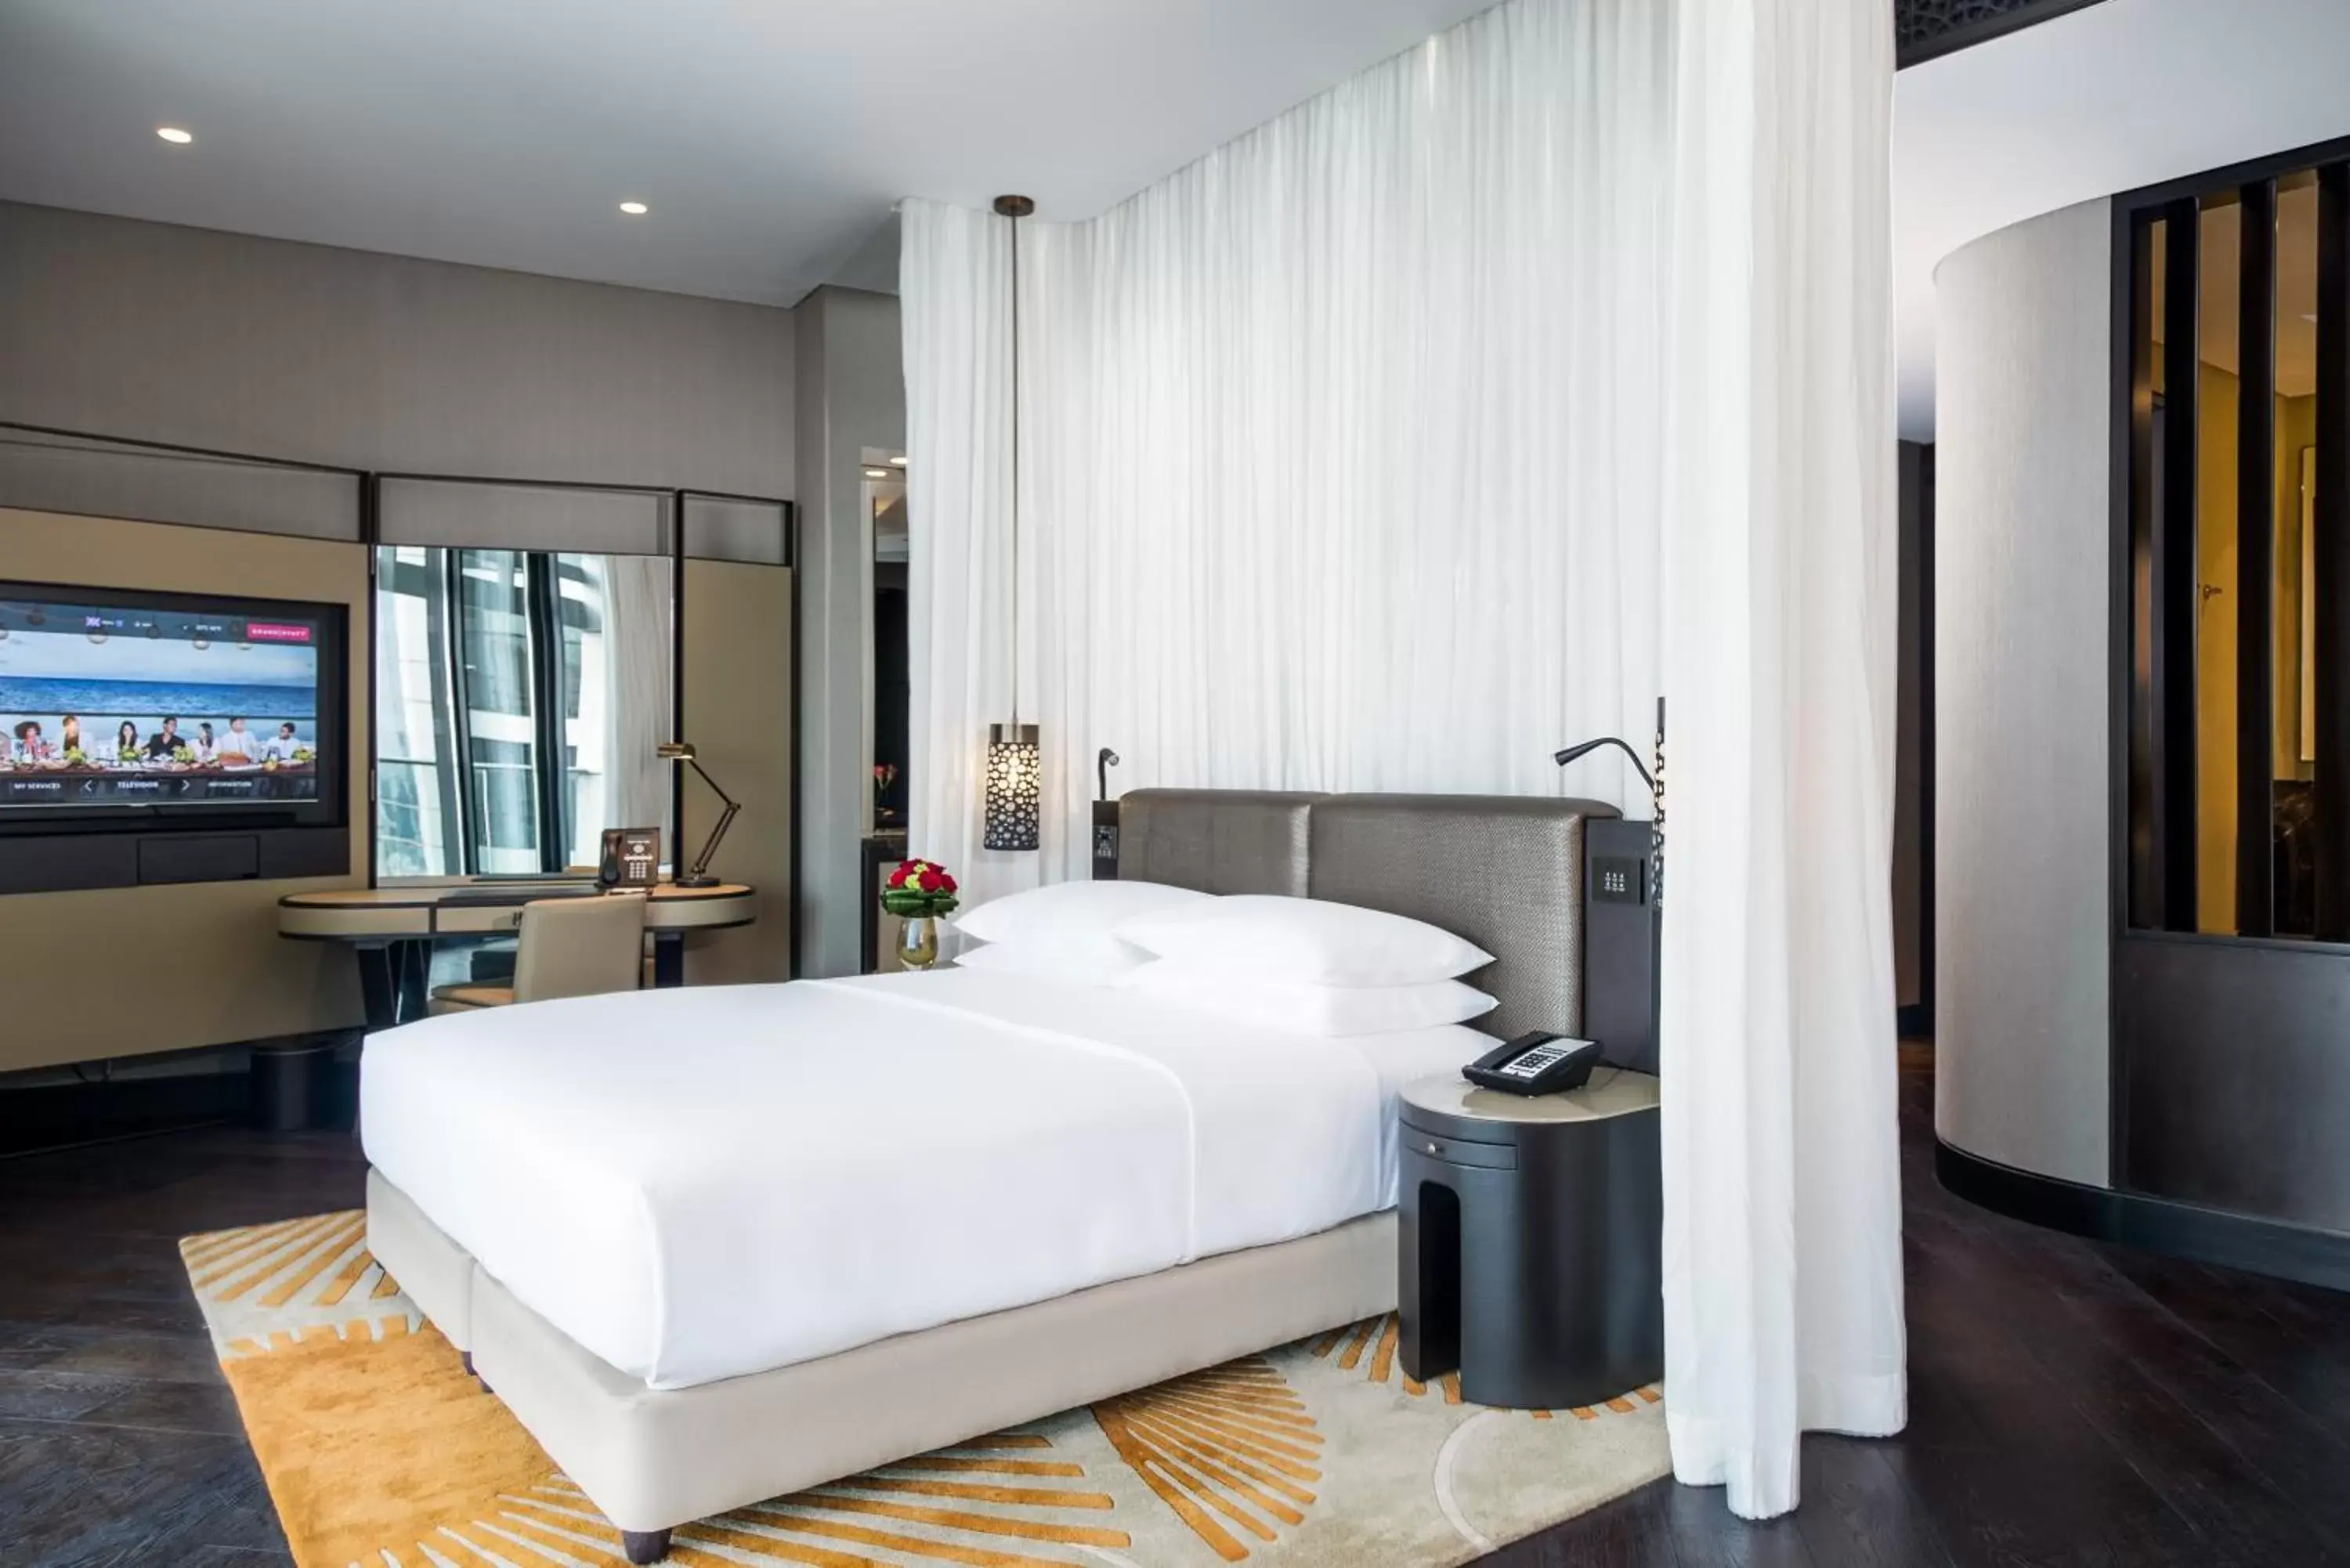 Deluxe King Room with Balcony in Grand Hyatt Abu Dhabi Hotel & Residences Emirates Pearl